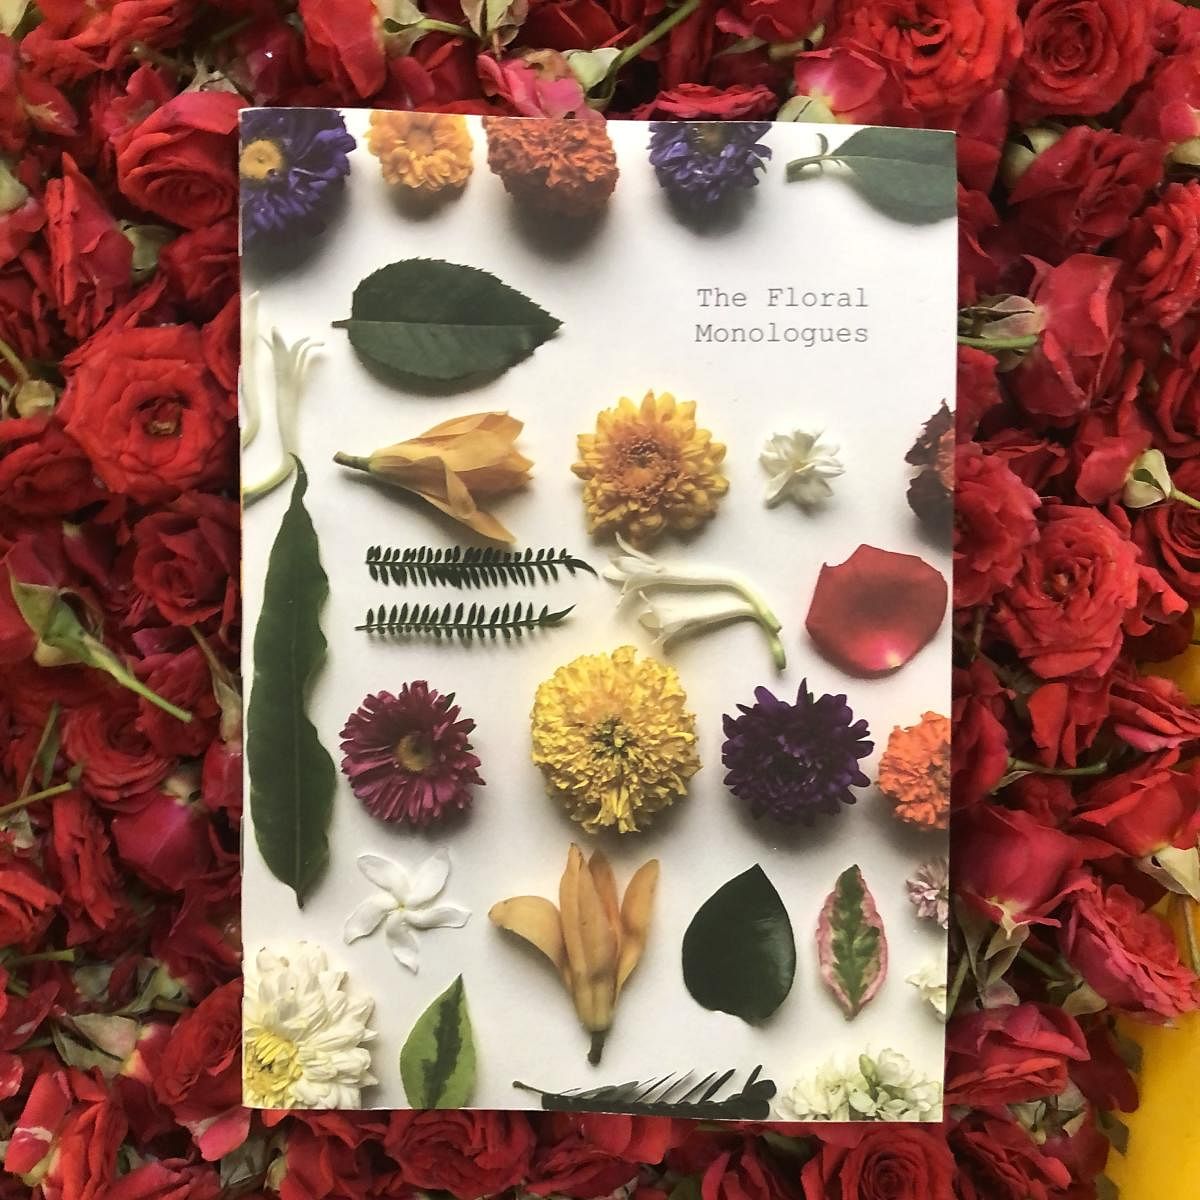 A photo zine called ‘The Floral Monologues’ by Rucha Dhayarkar will be launched at Cubbon Park on Sunday. 